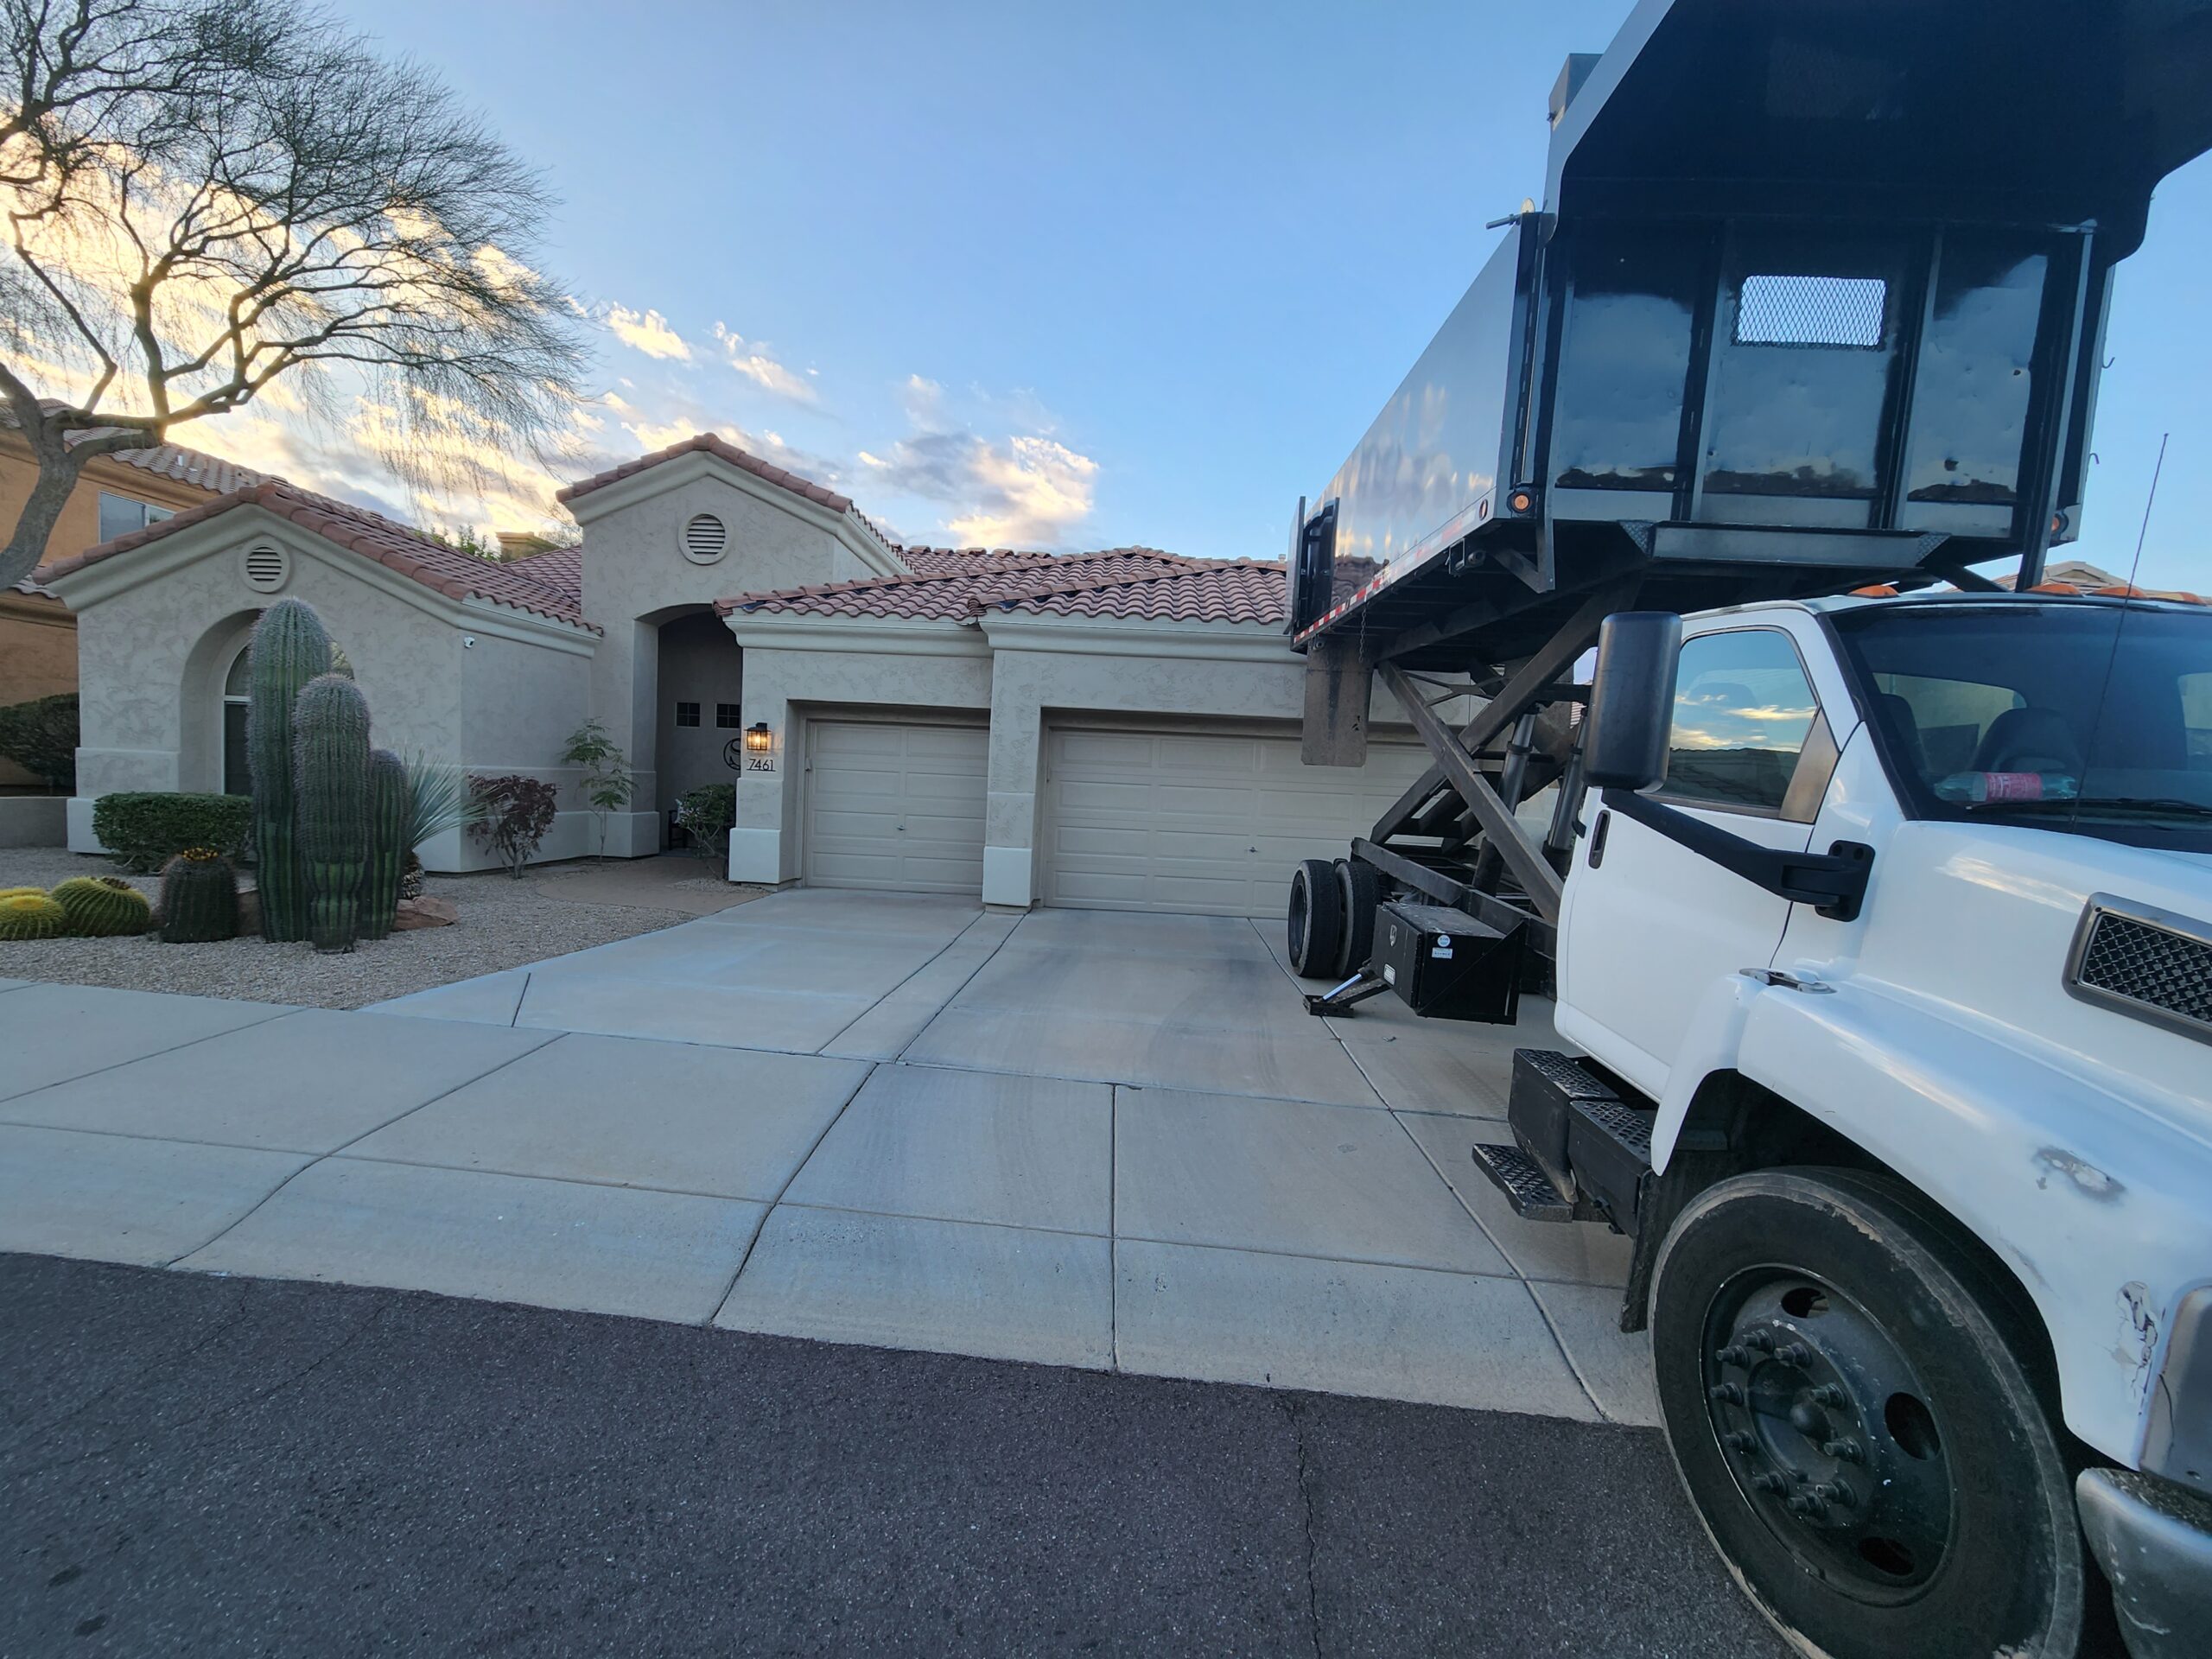 White dumpster truck positioned in front of a Tempe home, signifying ongoing roof work.